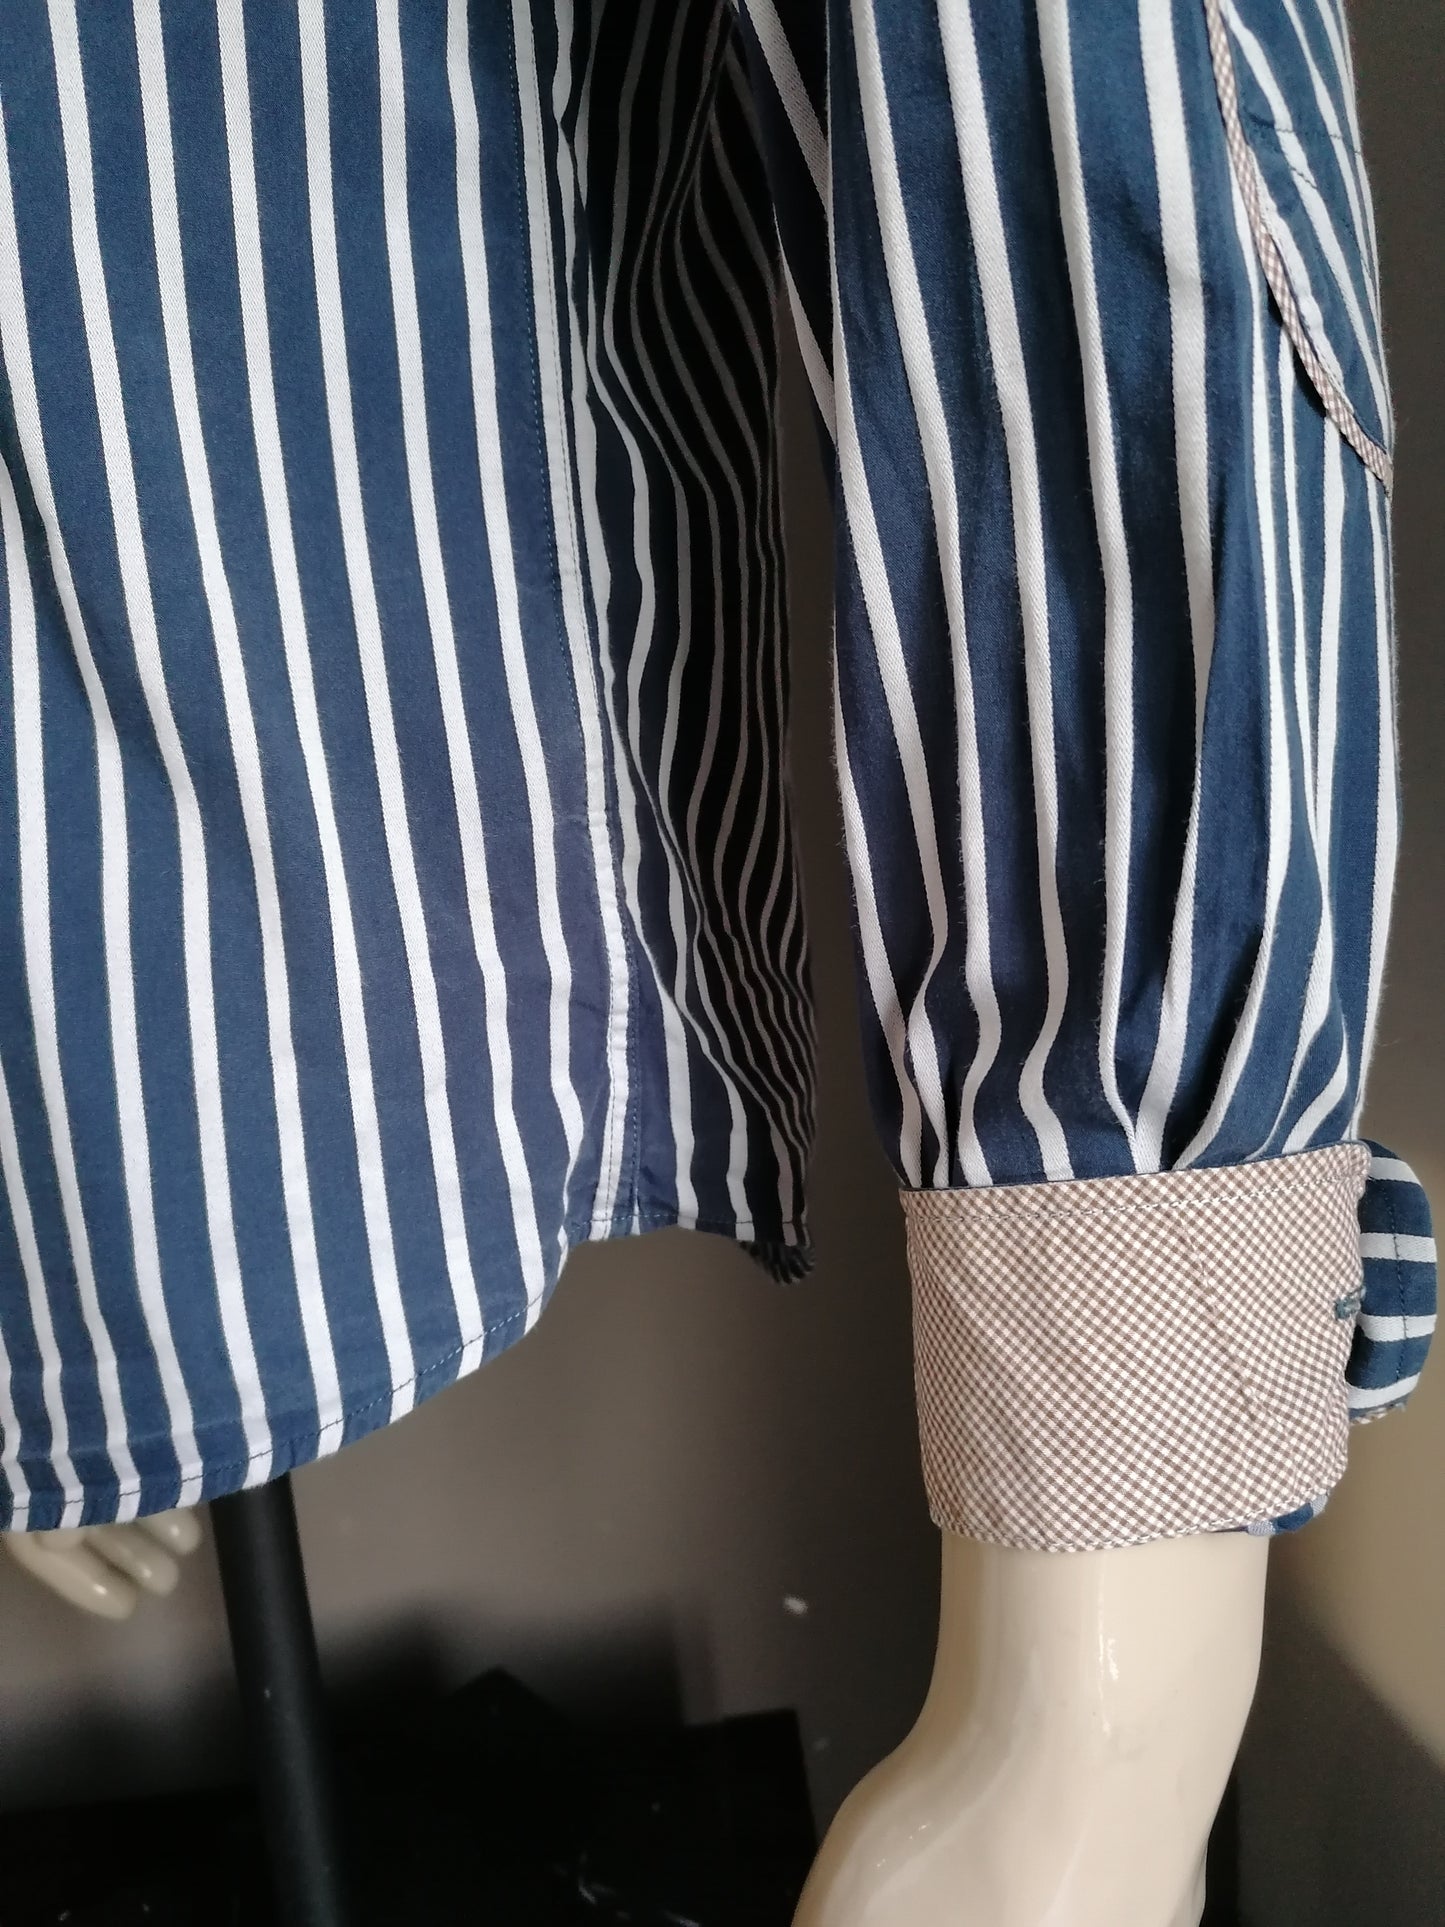 Holthaus shirt blue white striped. Size M.